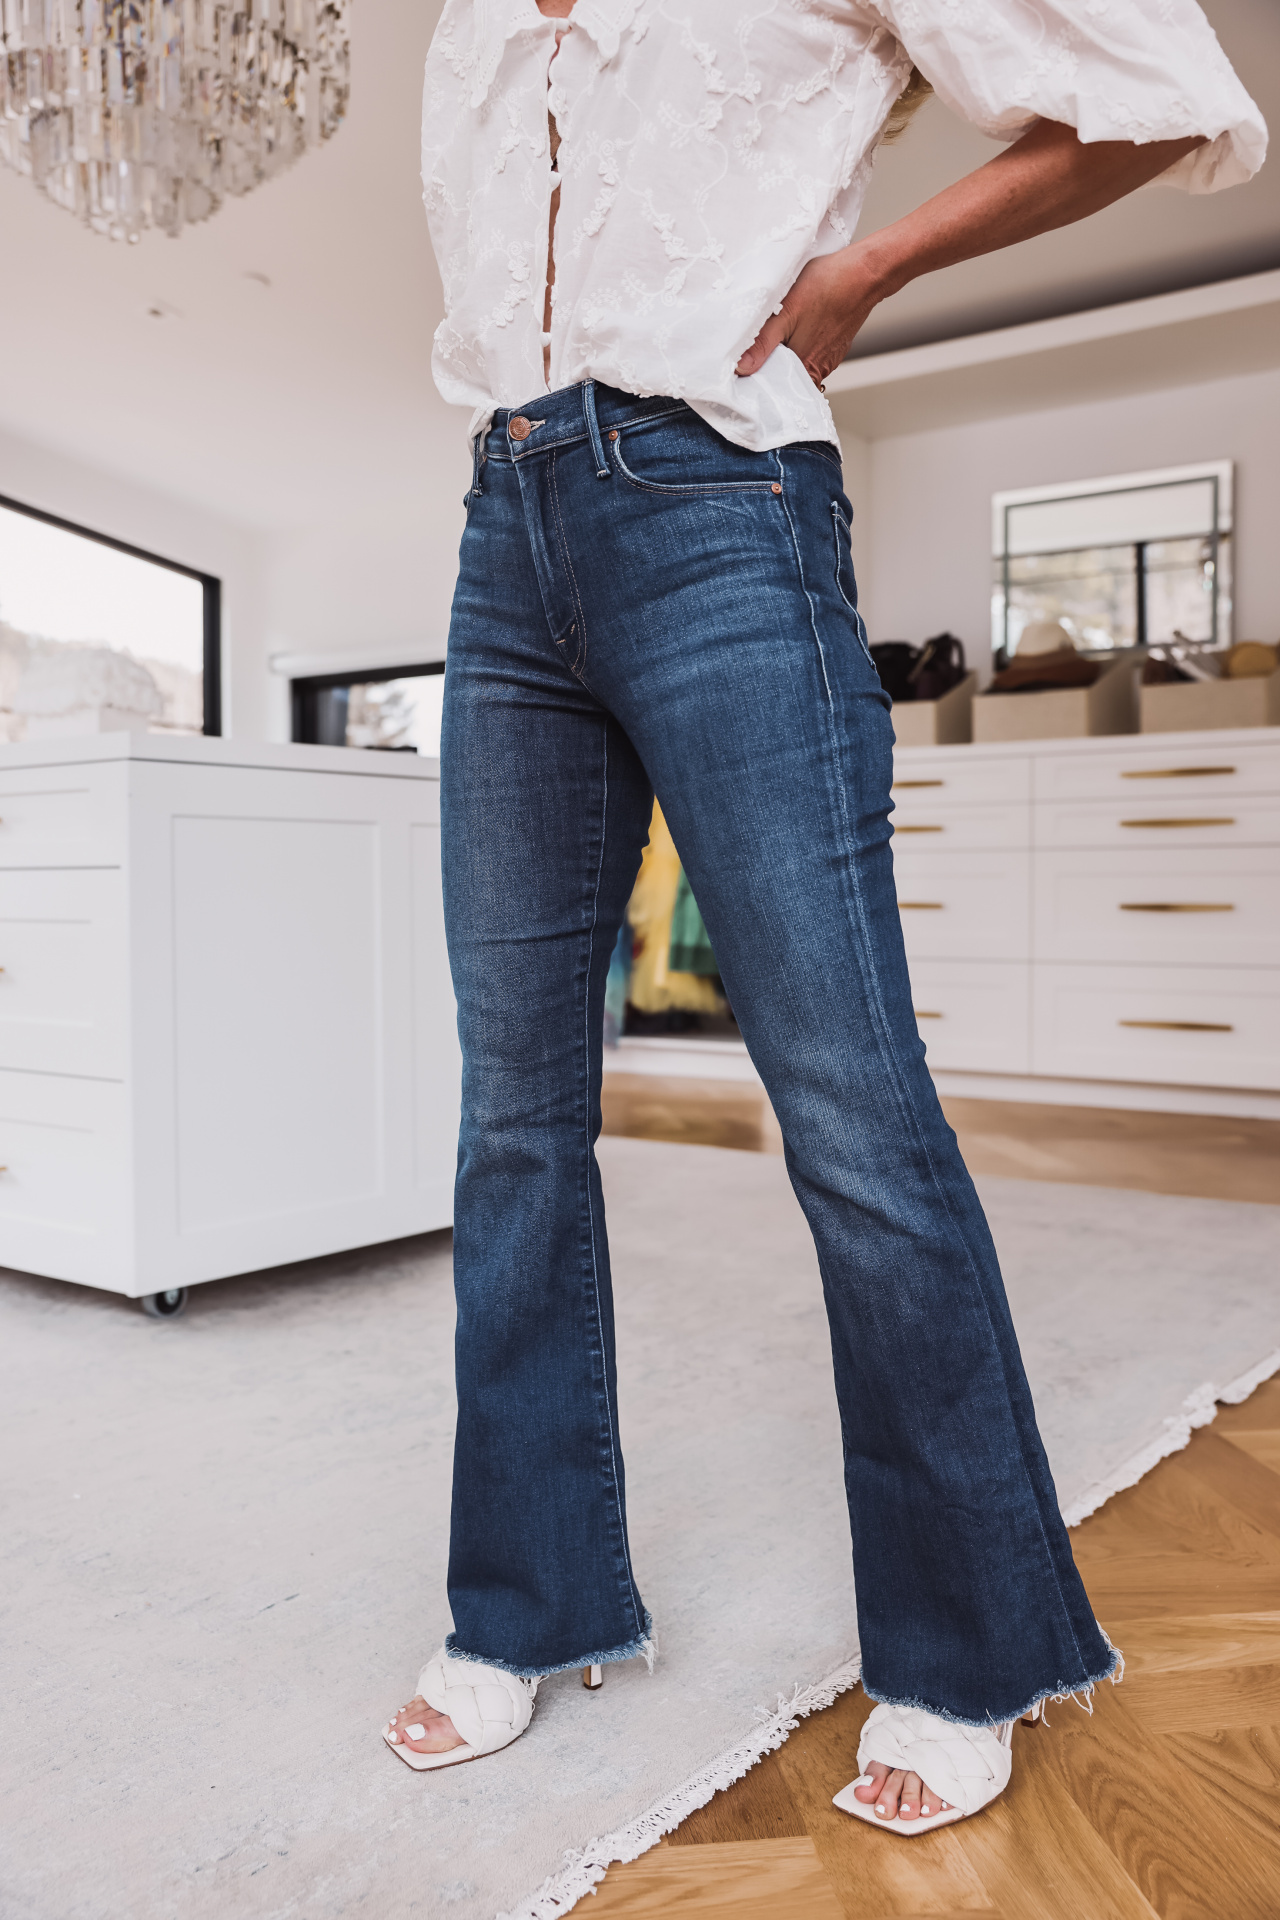 Know Your Ideal Inseam Length